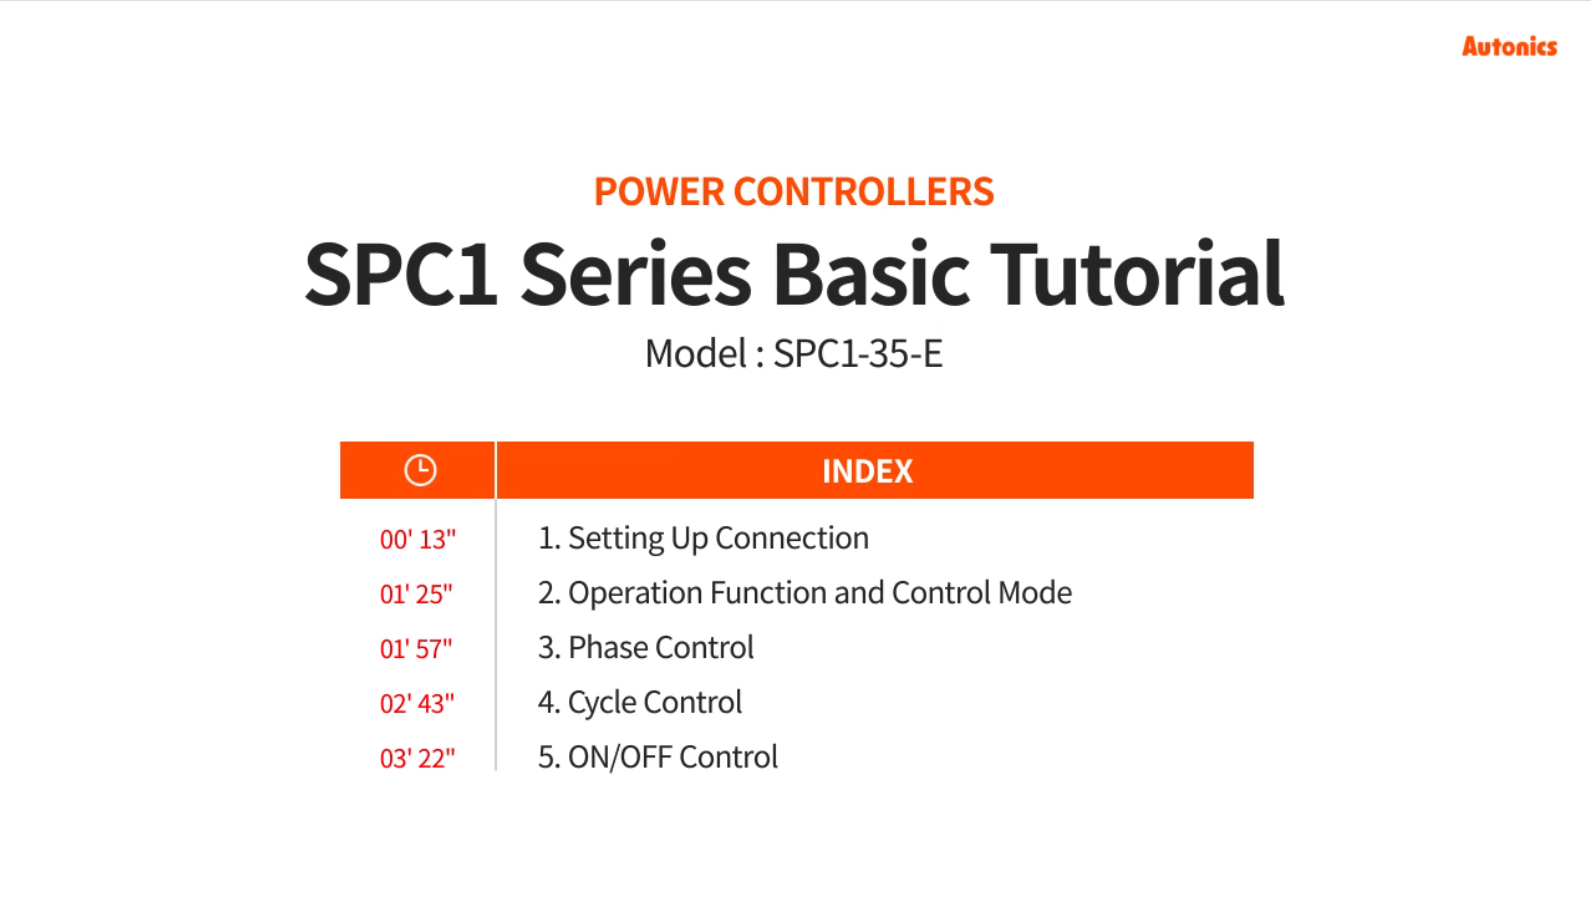 Power Controllers SPC1 Series